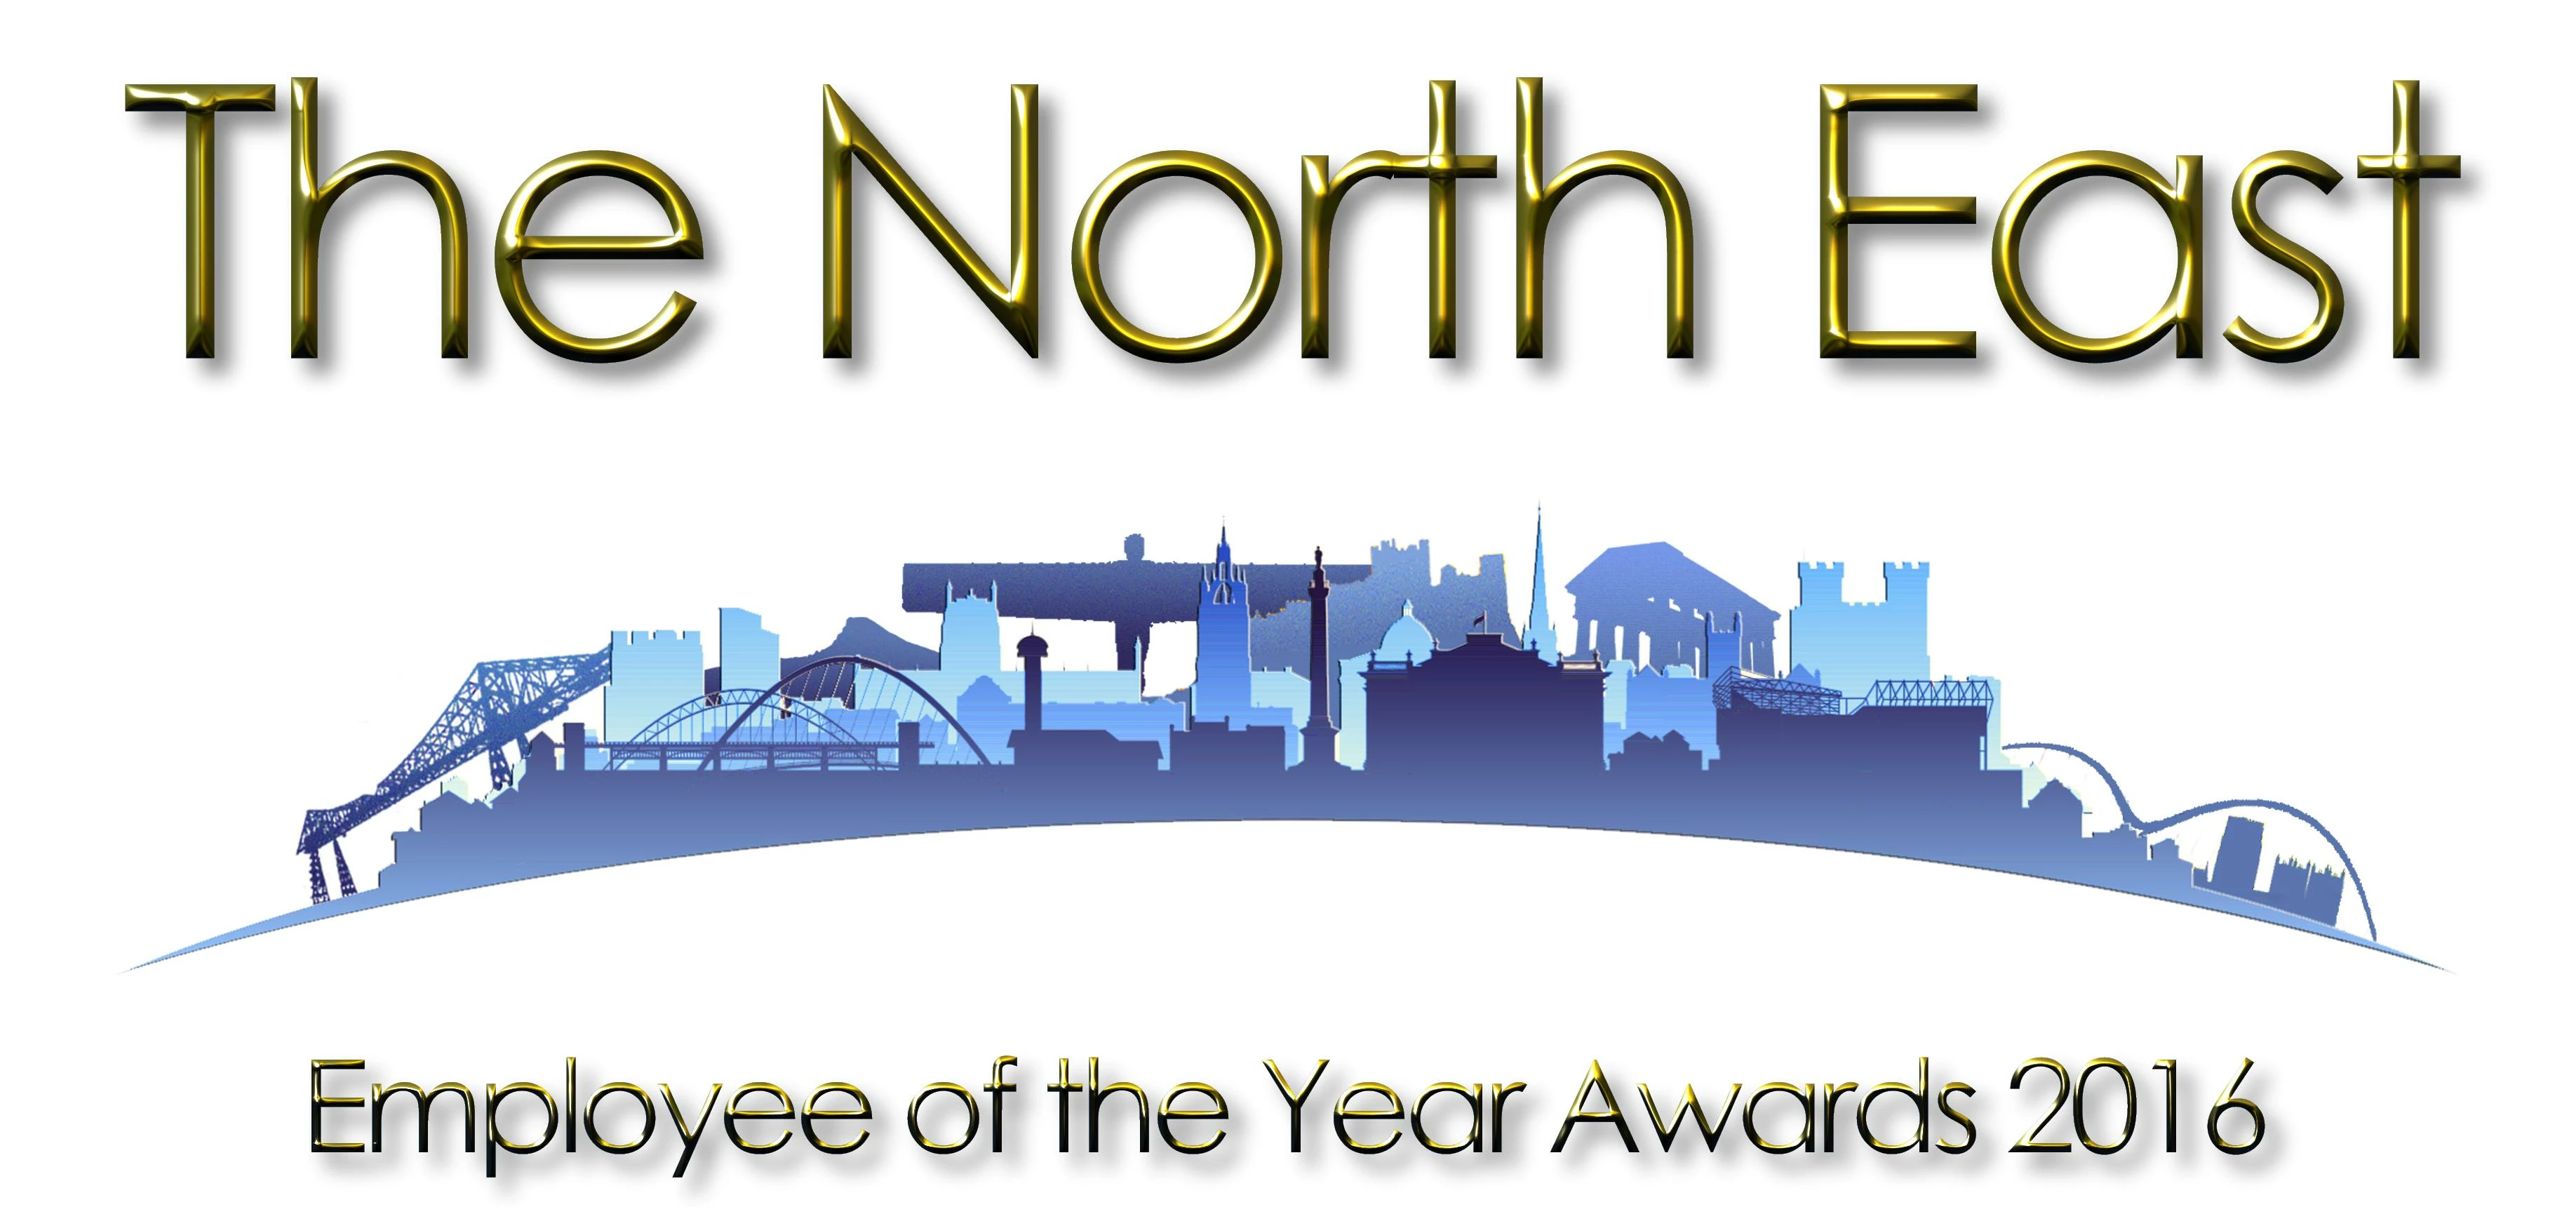 The North East Employee of the Year Awards logo